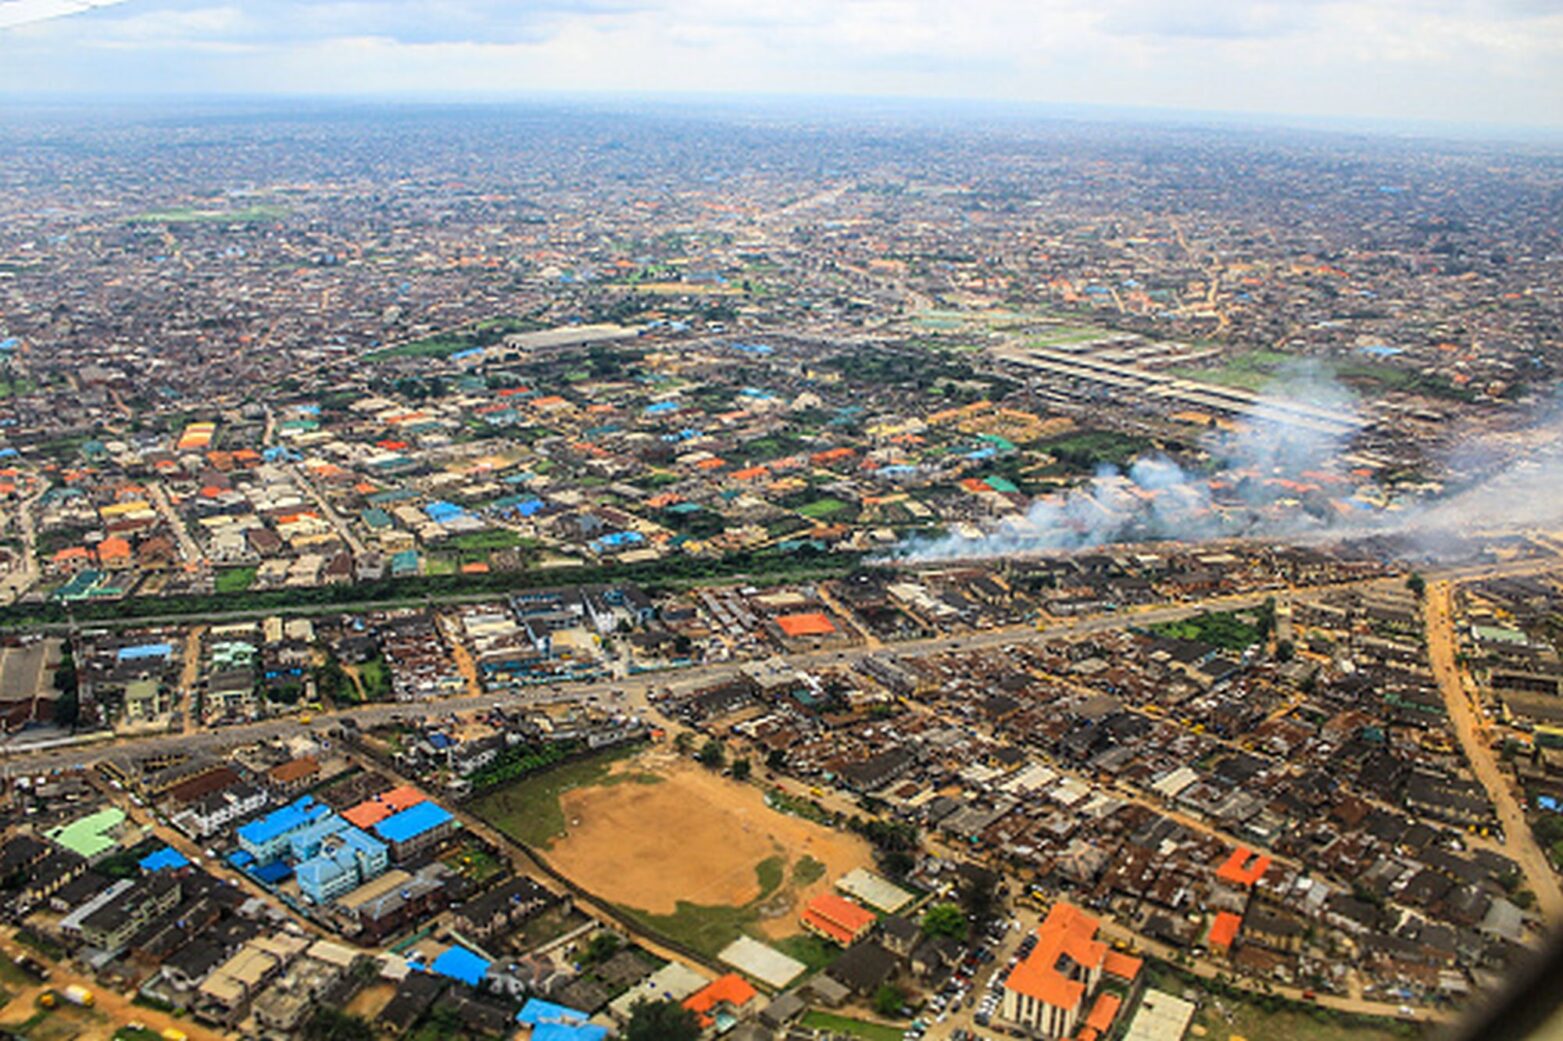 Lagos is the largest city of Nigeria.